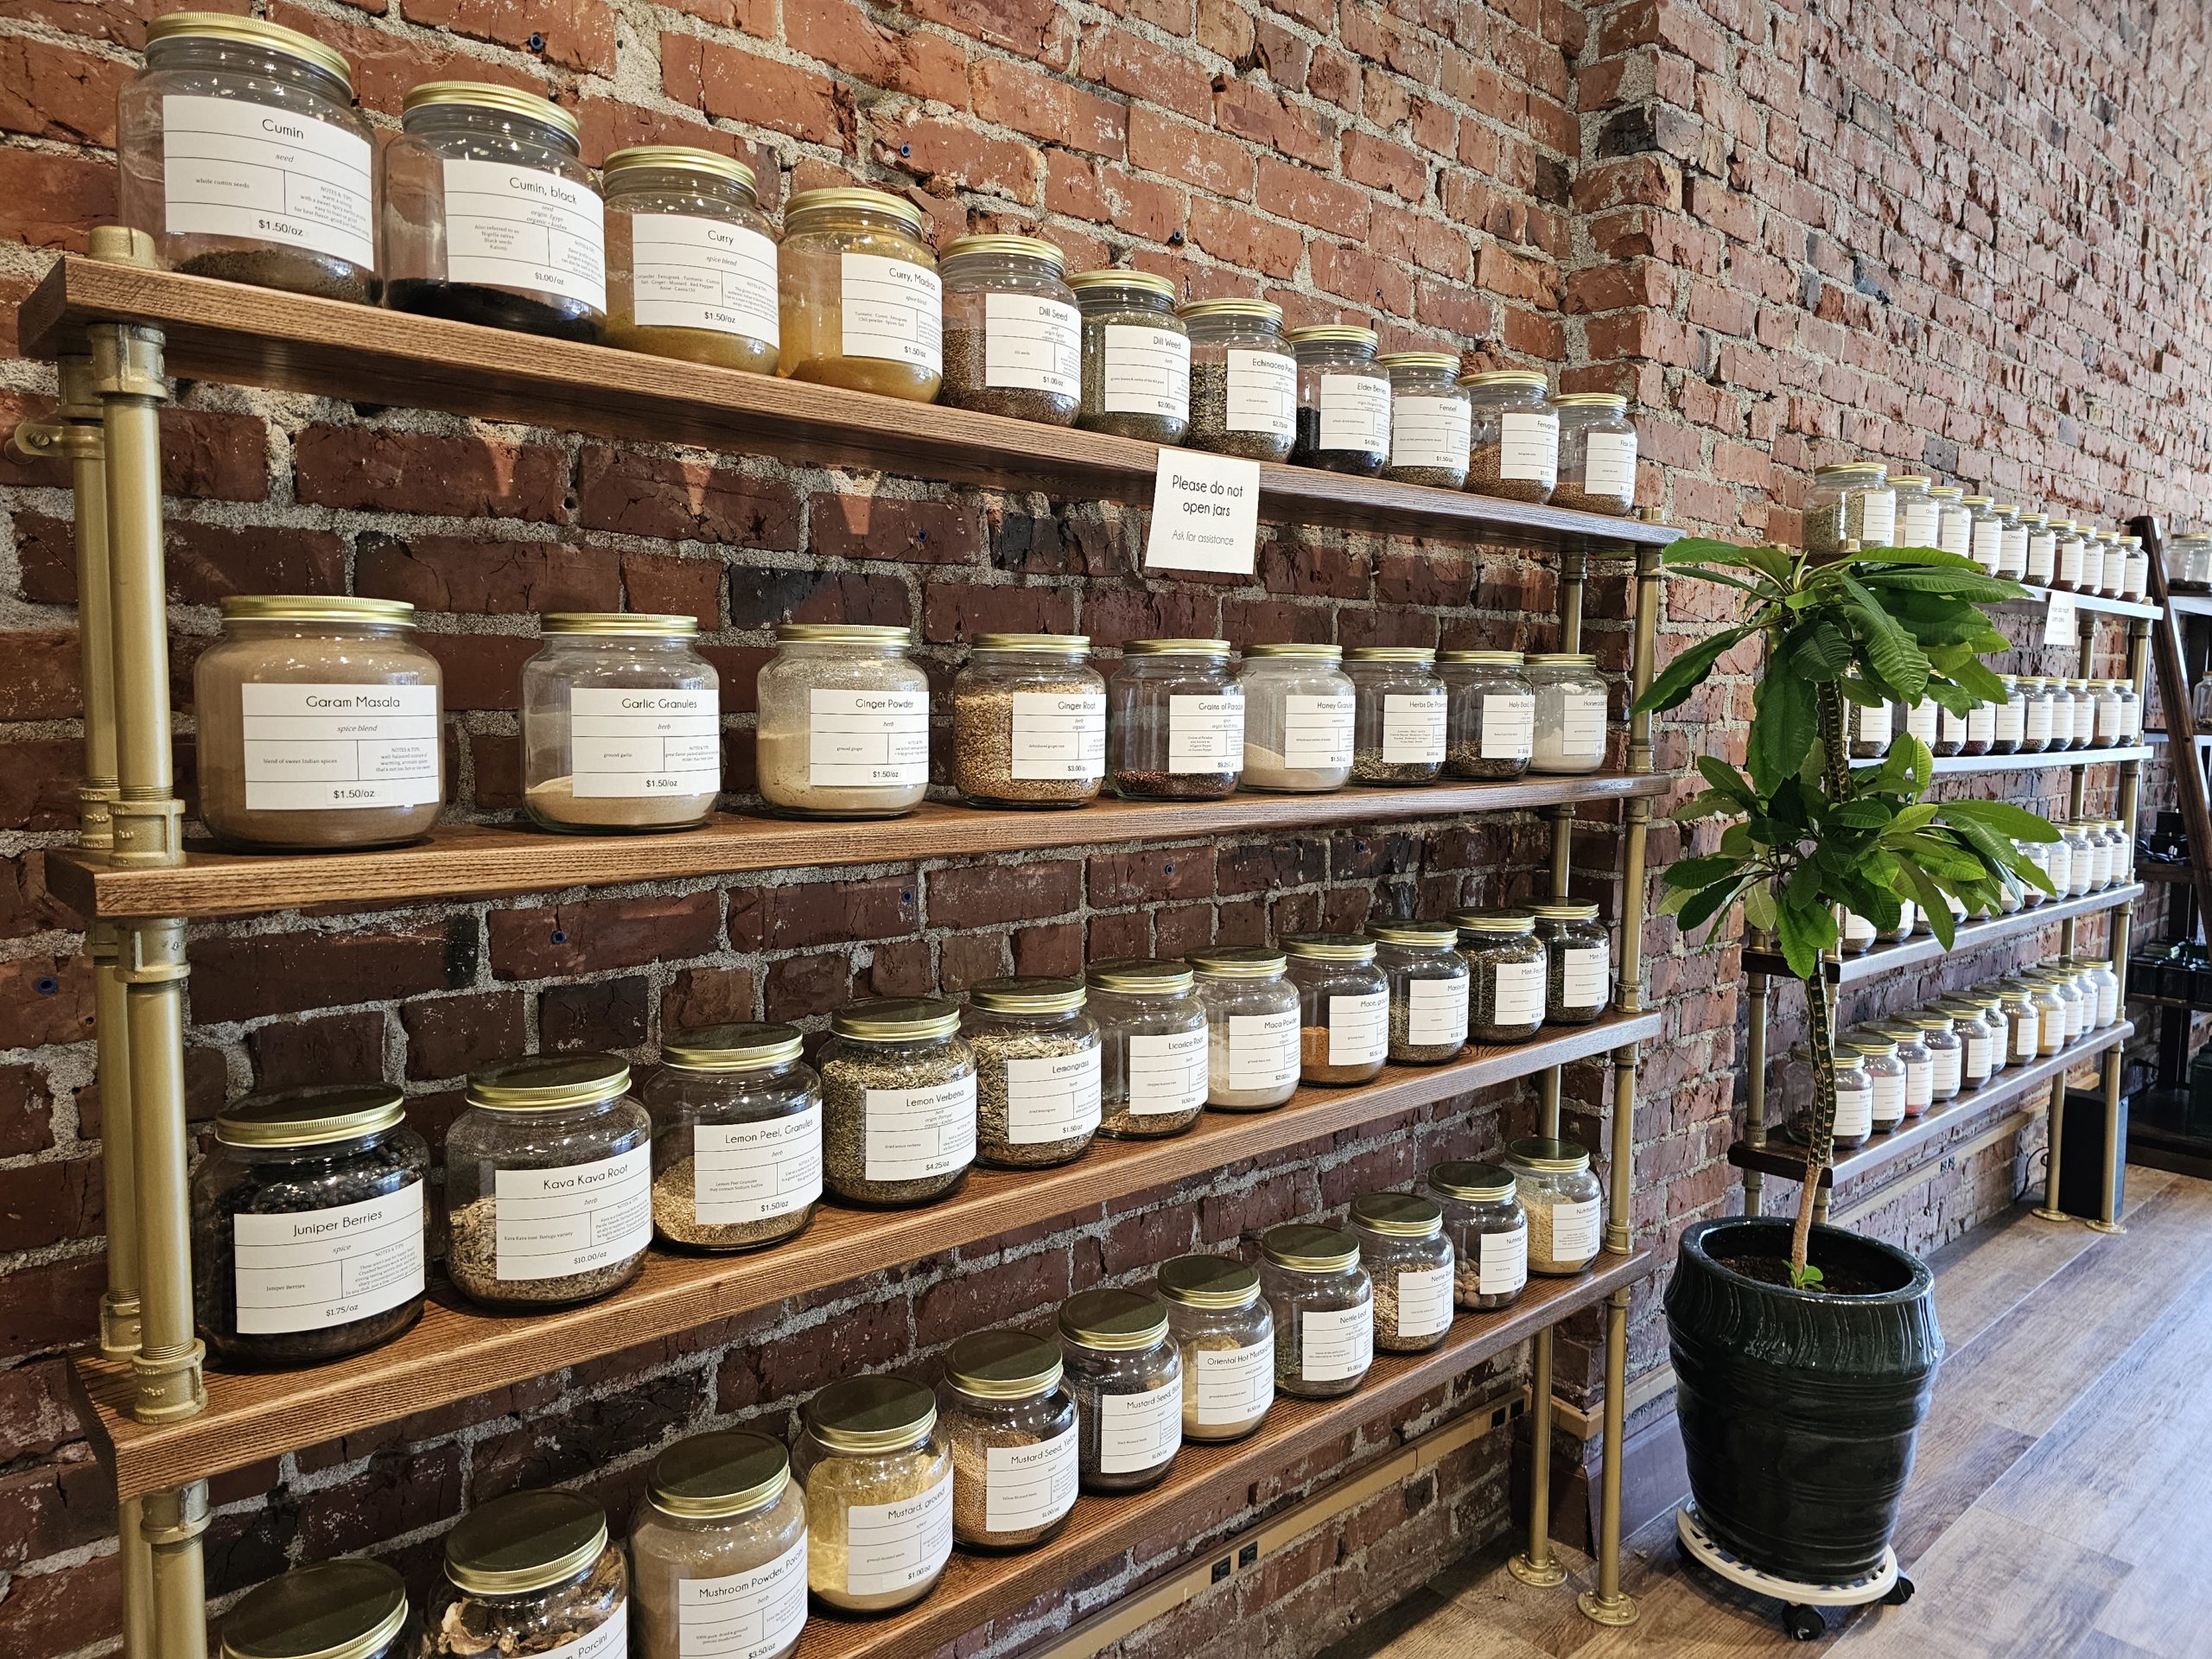 a shelf made of wood and pipe, full of glass jars with spices, in front of a brick wall